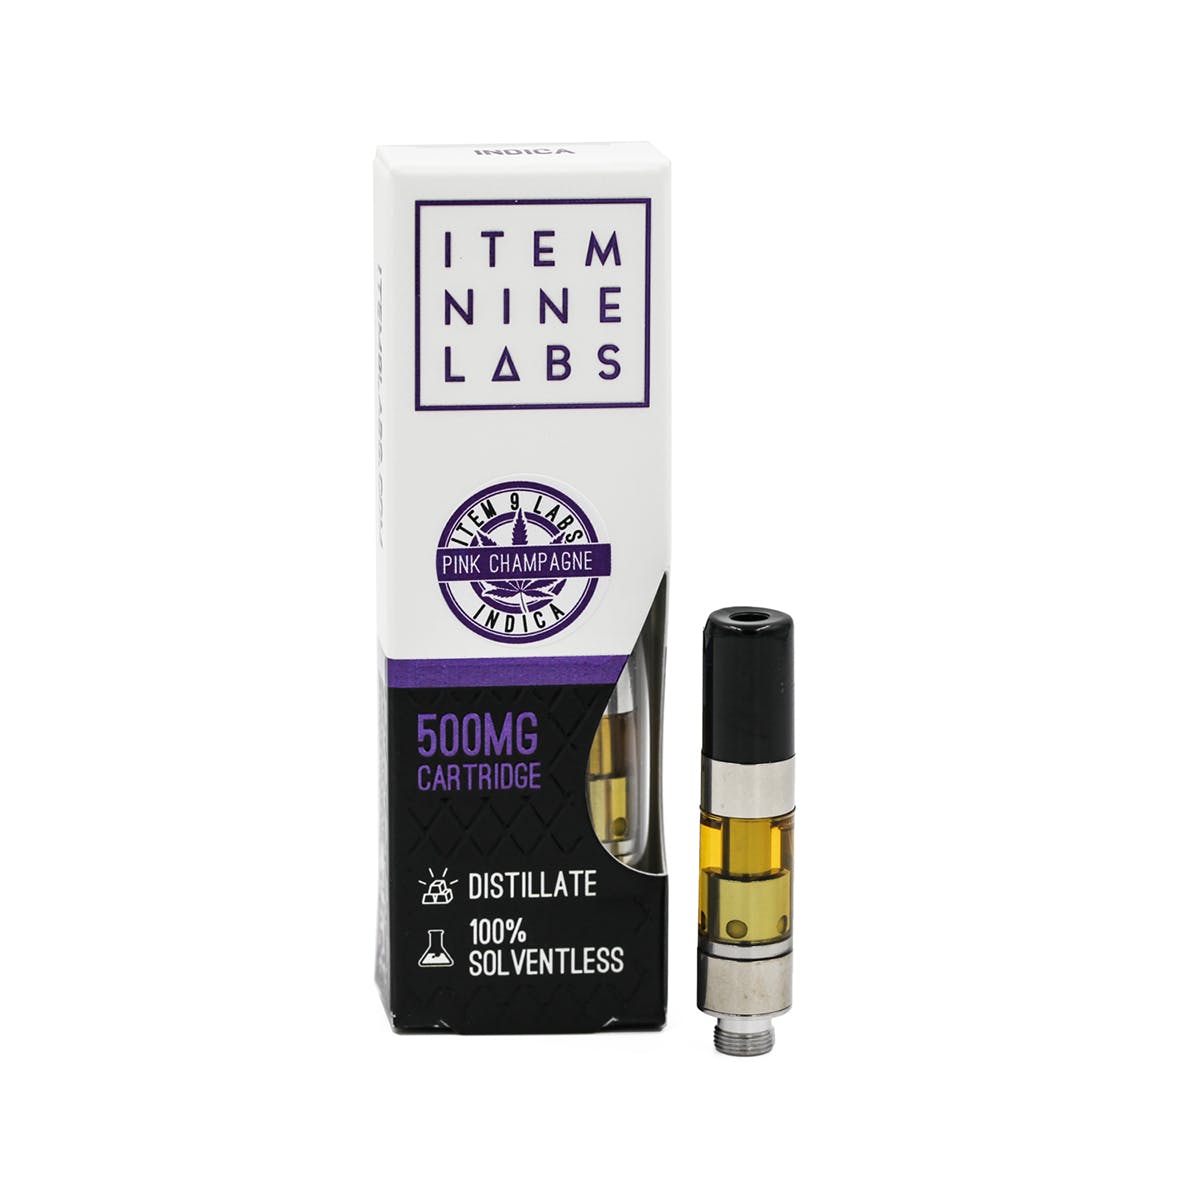 concentrate-item-9-labs-pink-champagne-distillate-cartridge